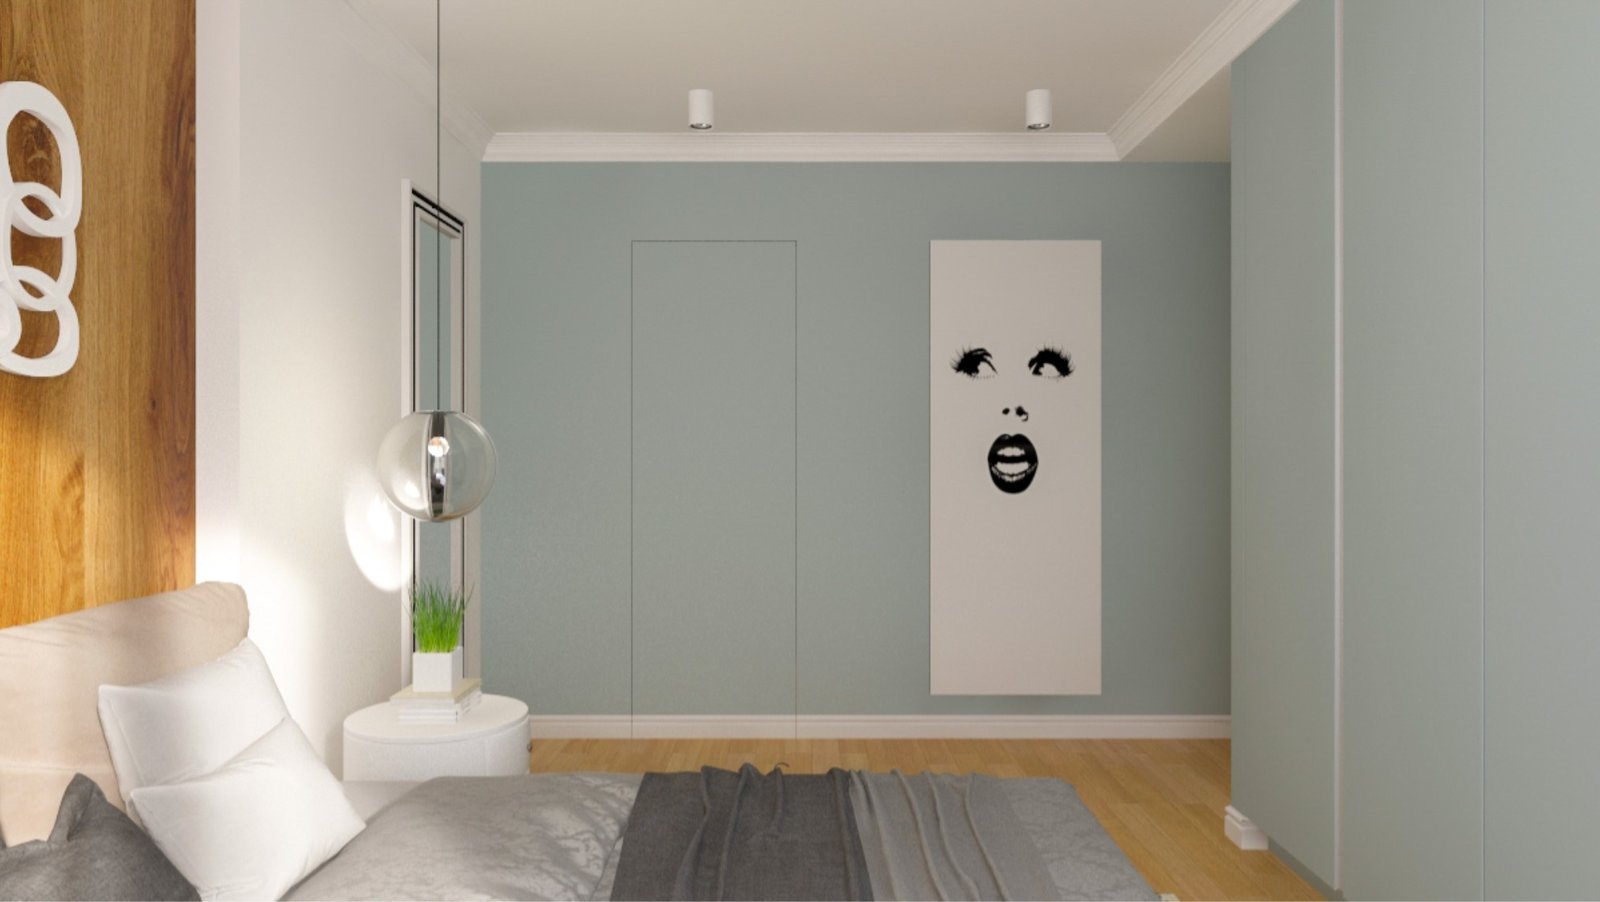 "Interior renovation of a modern bedroom showcasing a light teal wall, a white door, elegant globe pendant light, and a striking black and white artwork of a woman's facial features."